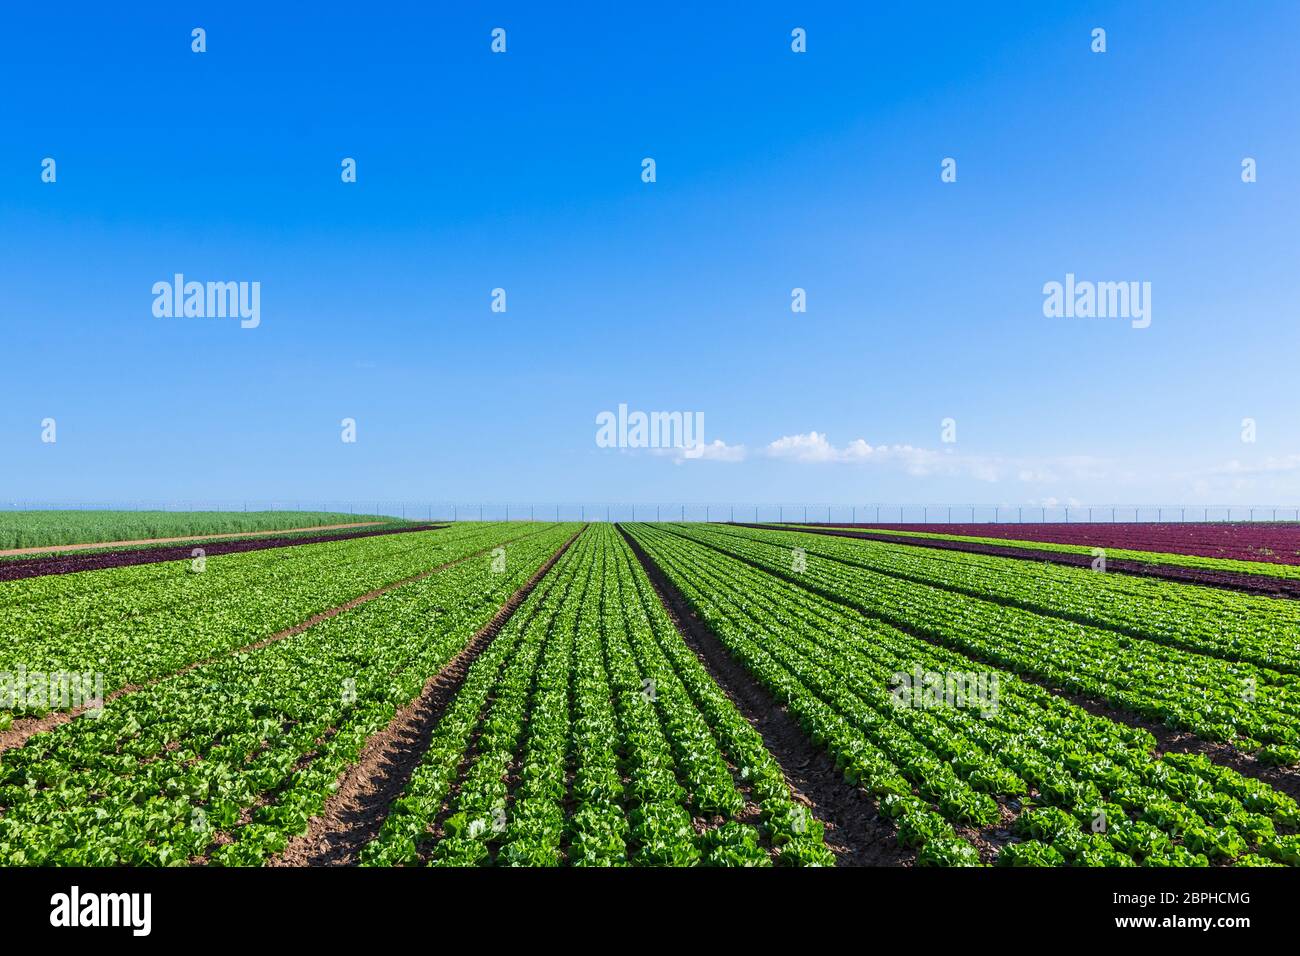 salat field with rows of fresh salat on a sunny day Stock Photo